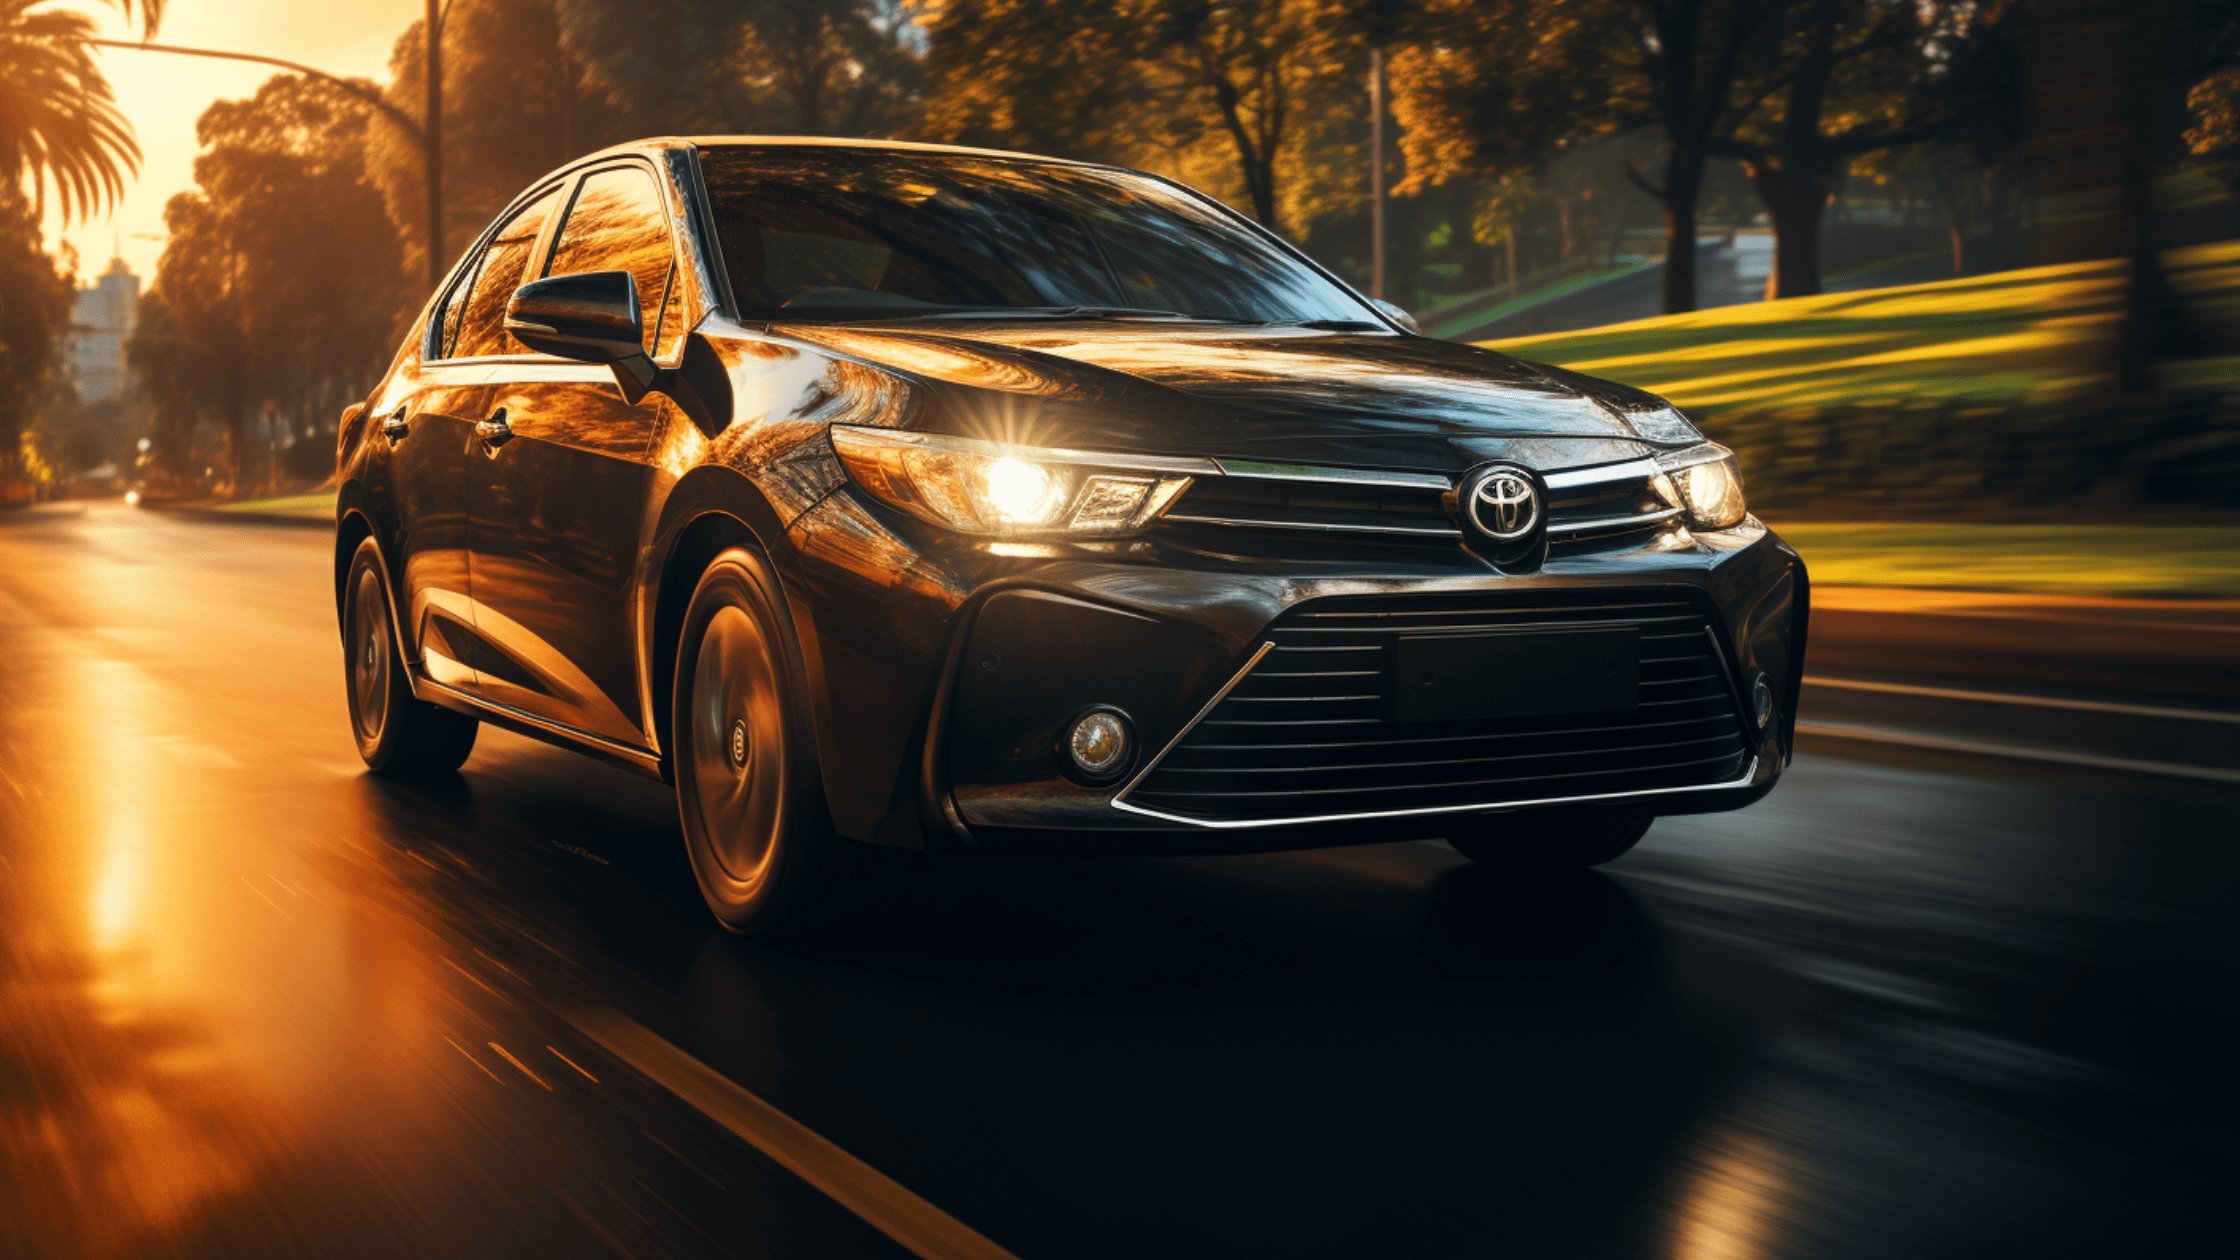 Toyota bought on a Subprime Auto Loan